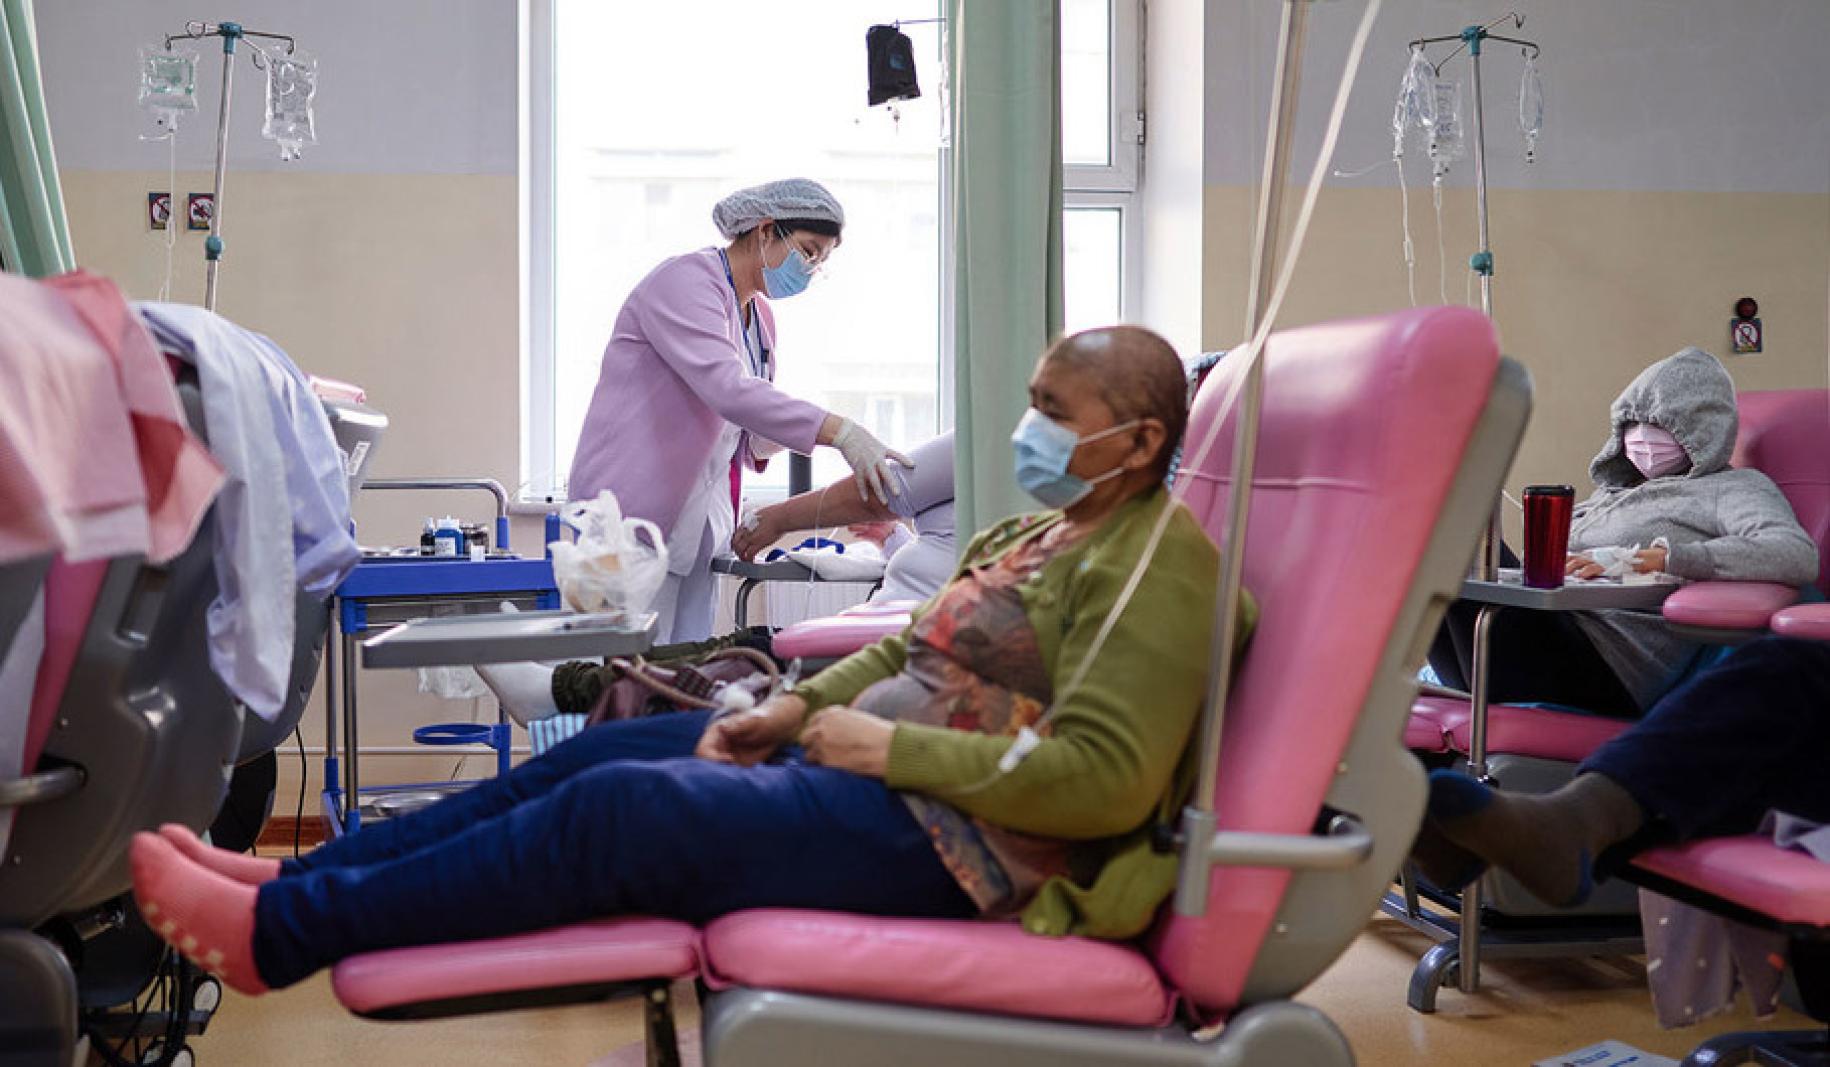 In a medical office a person is sits in a pink chair receiving medicine via an IV.